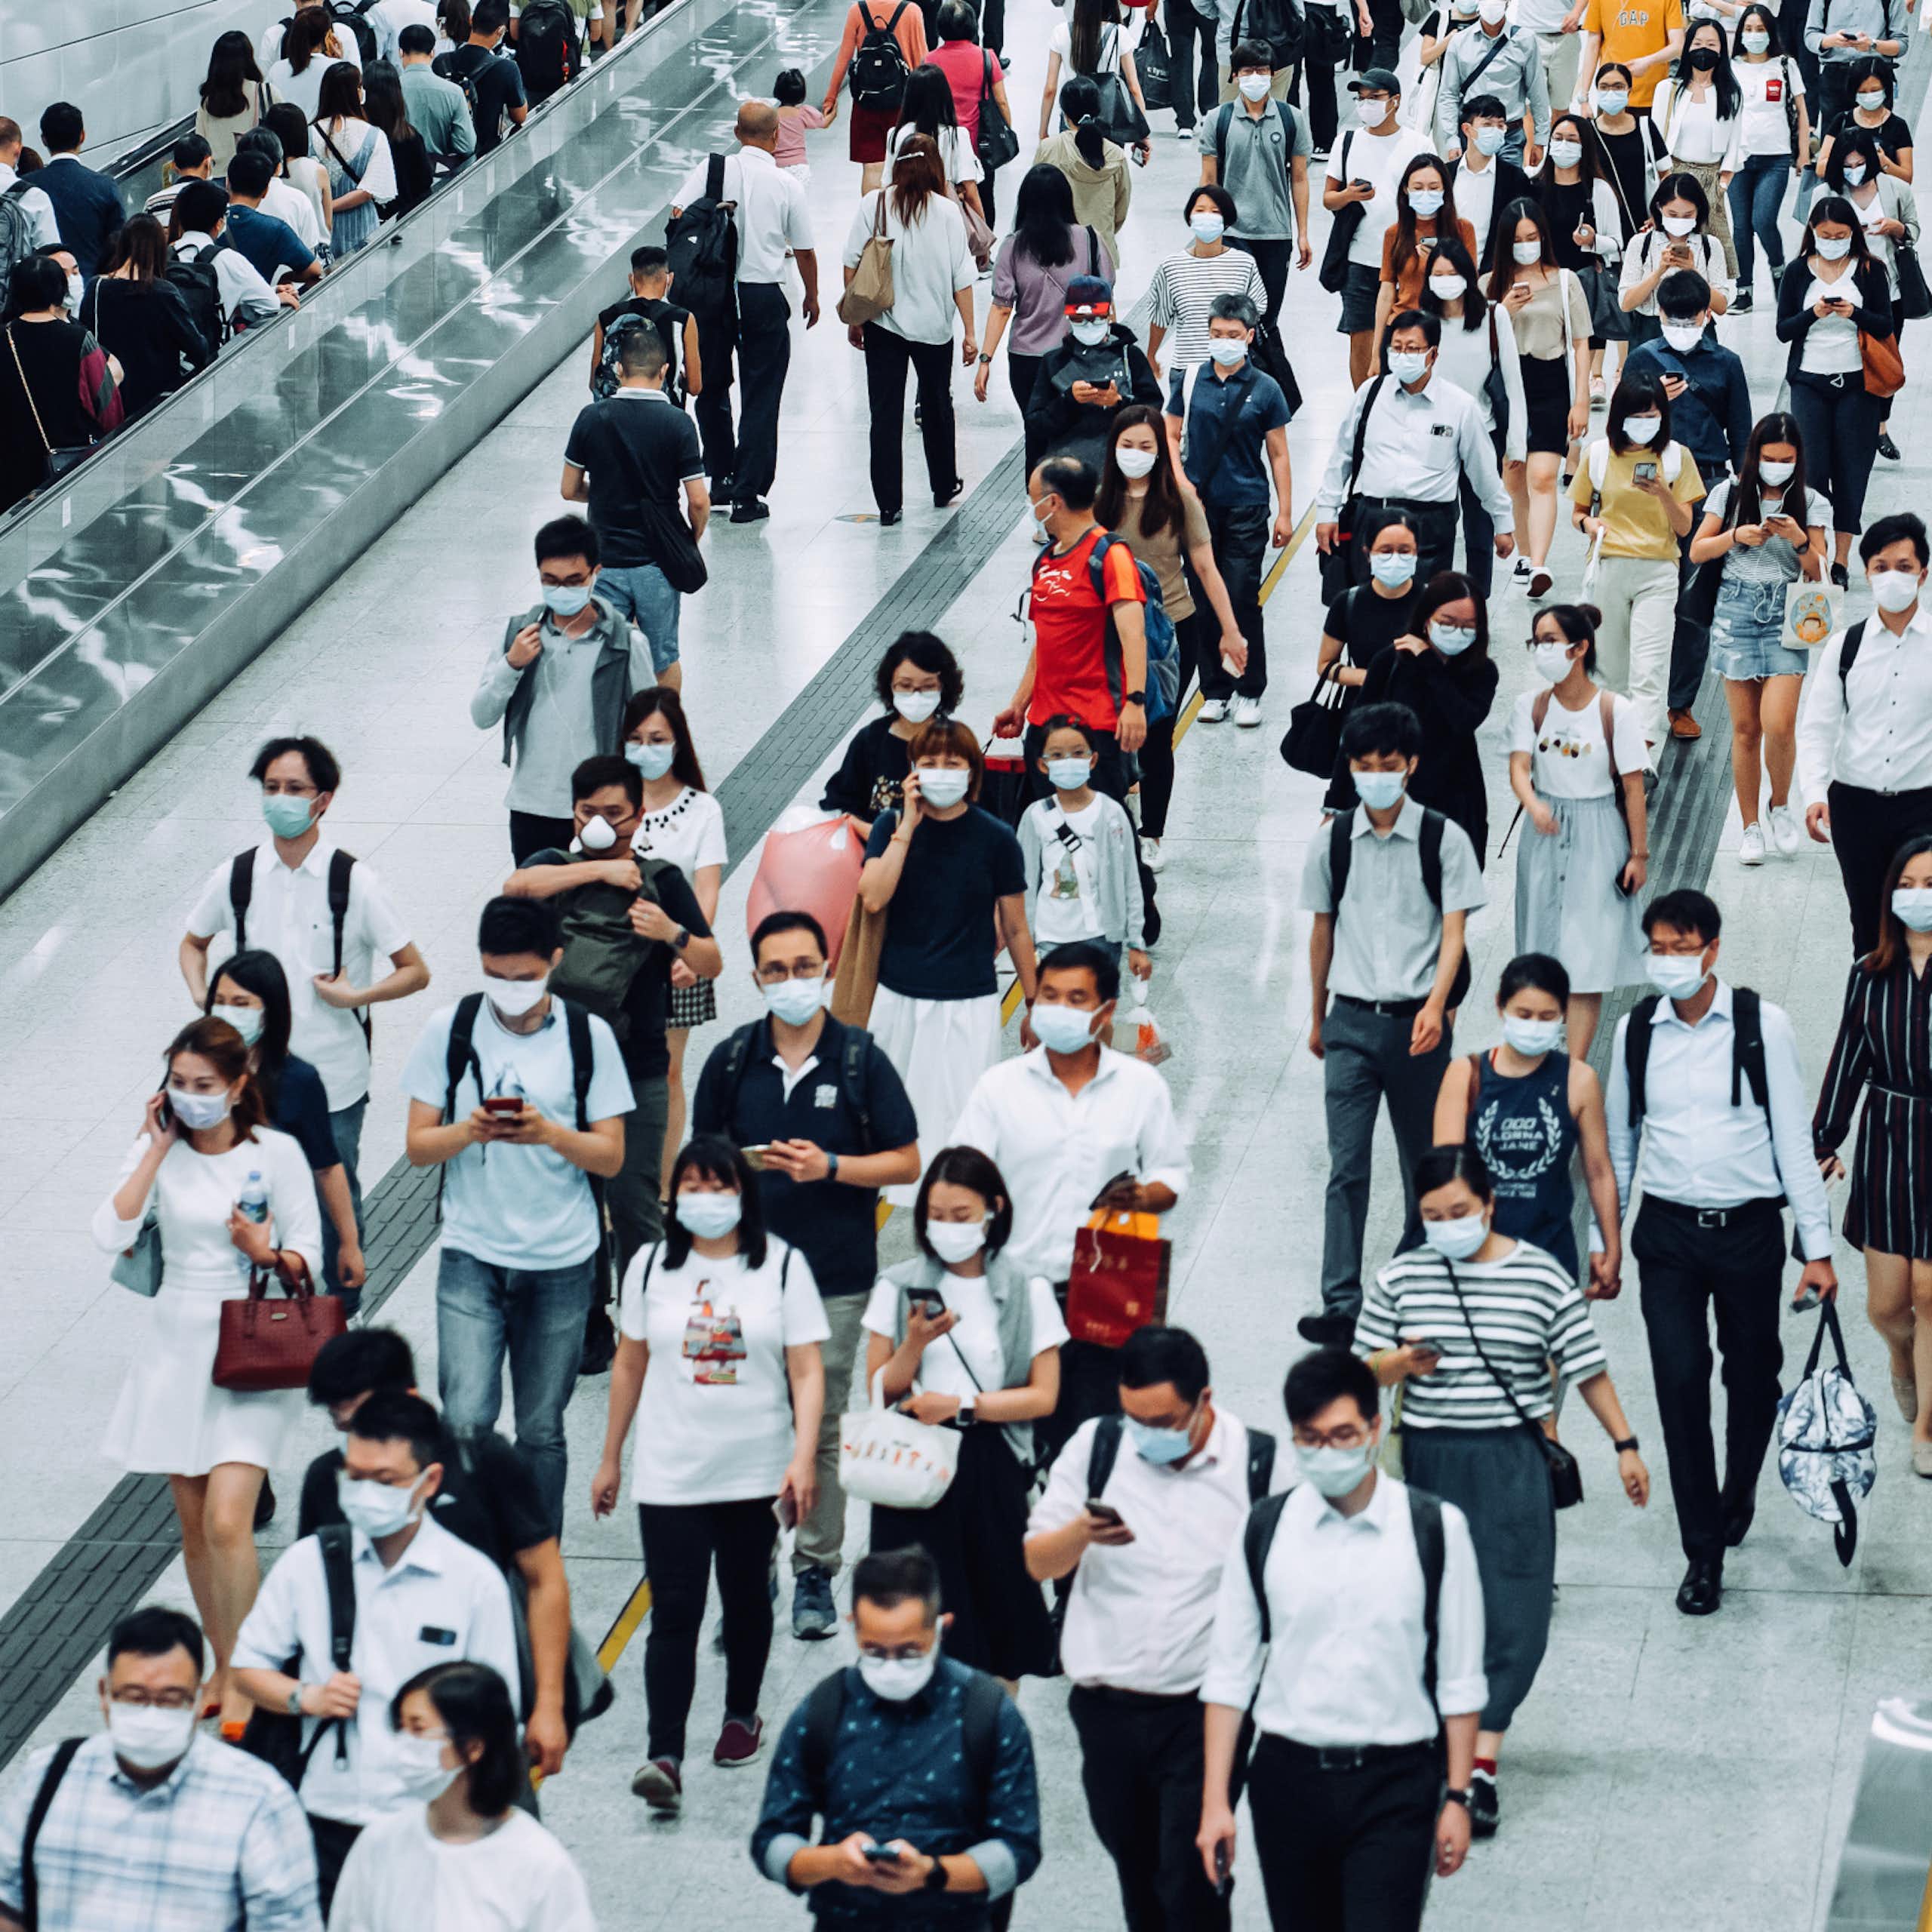 Crowd of busy commuters with face masks walking through platforms at a subway station